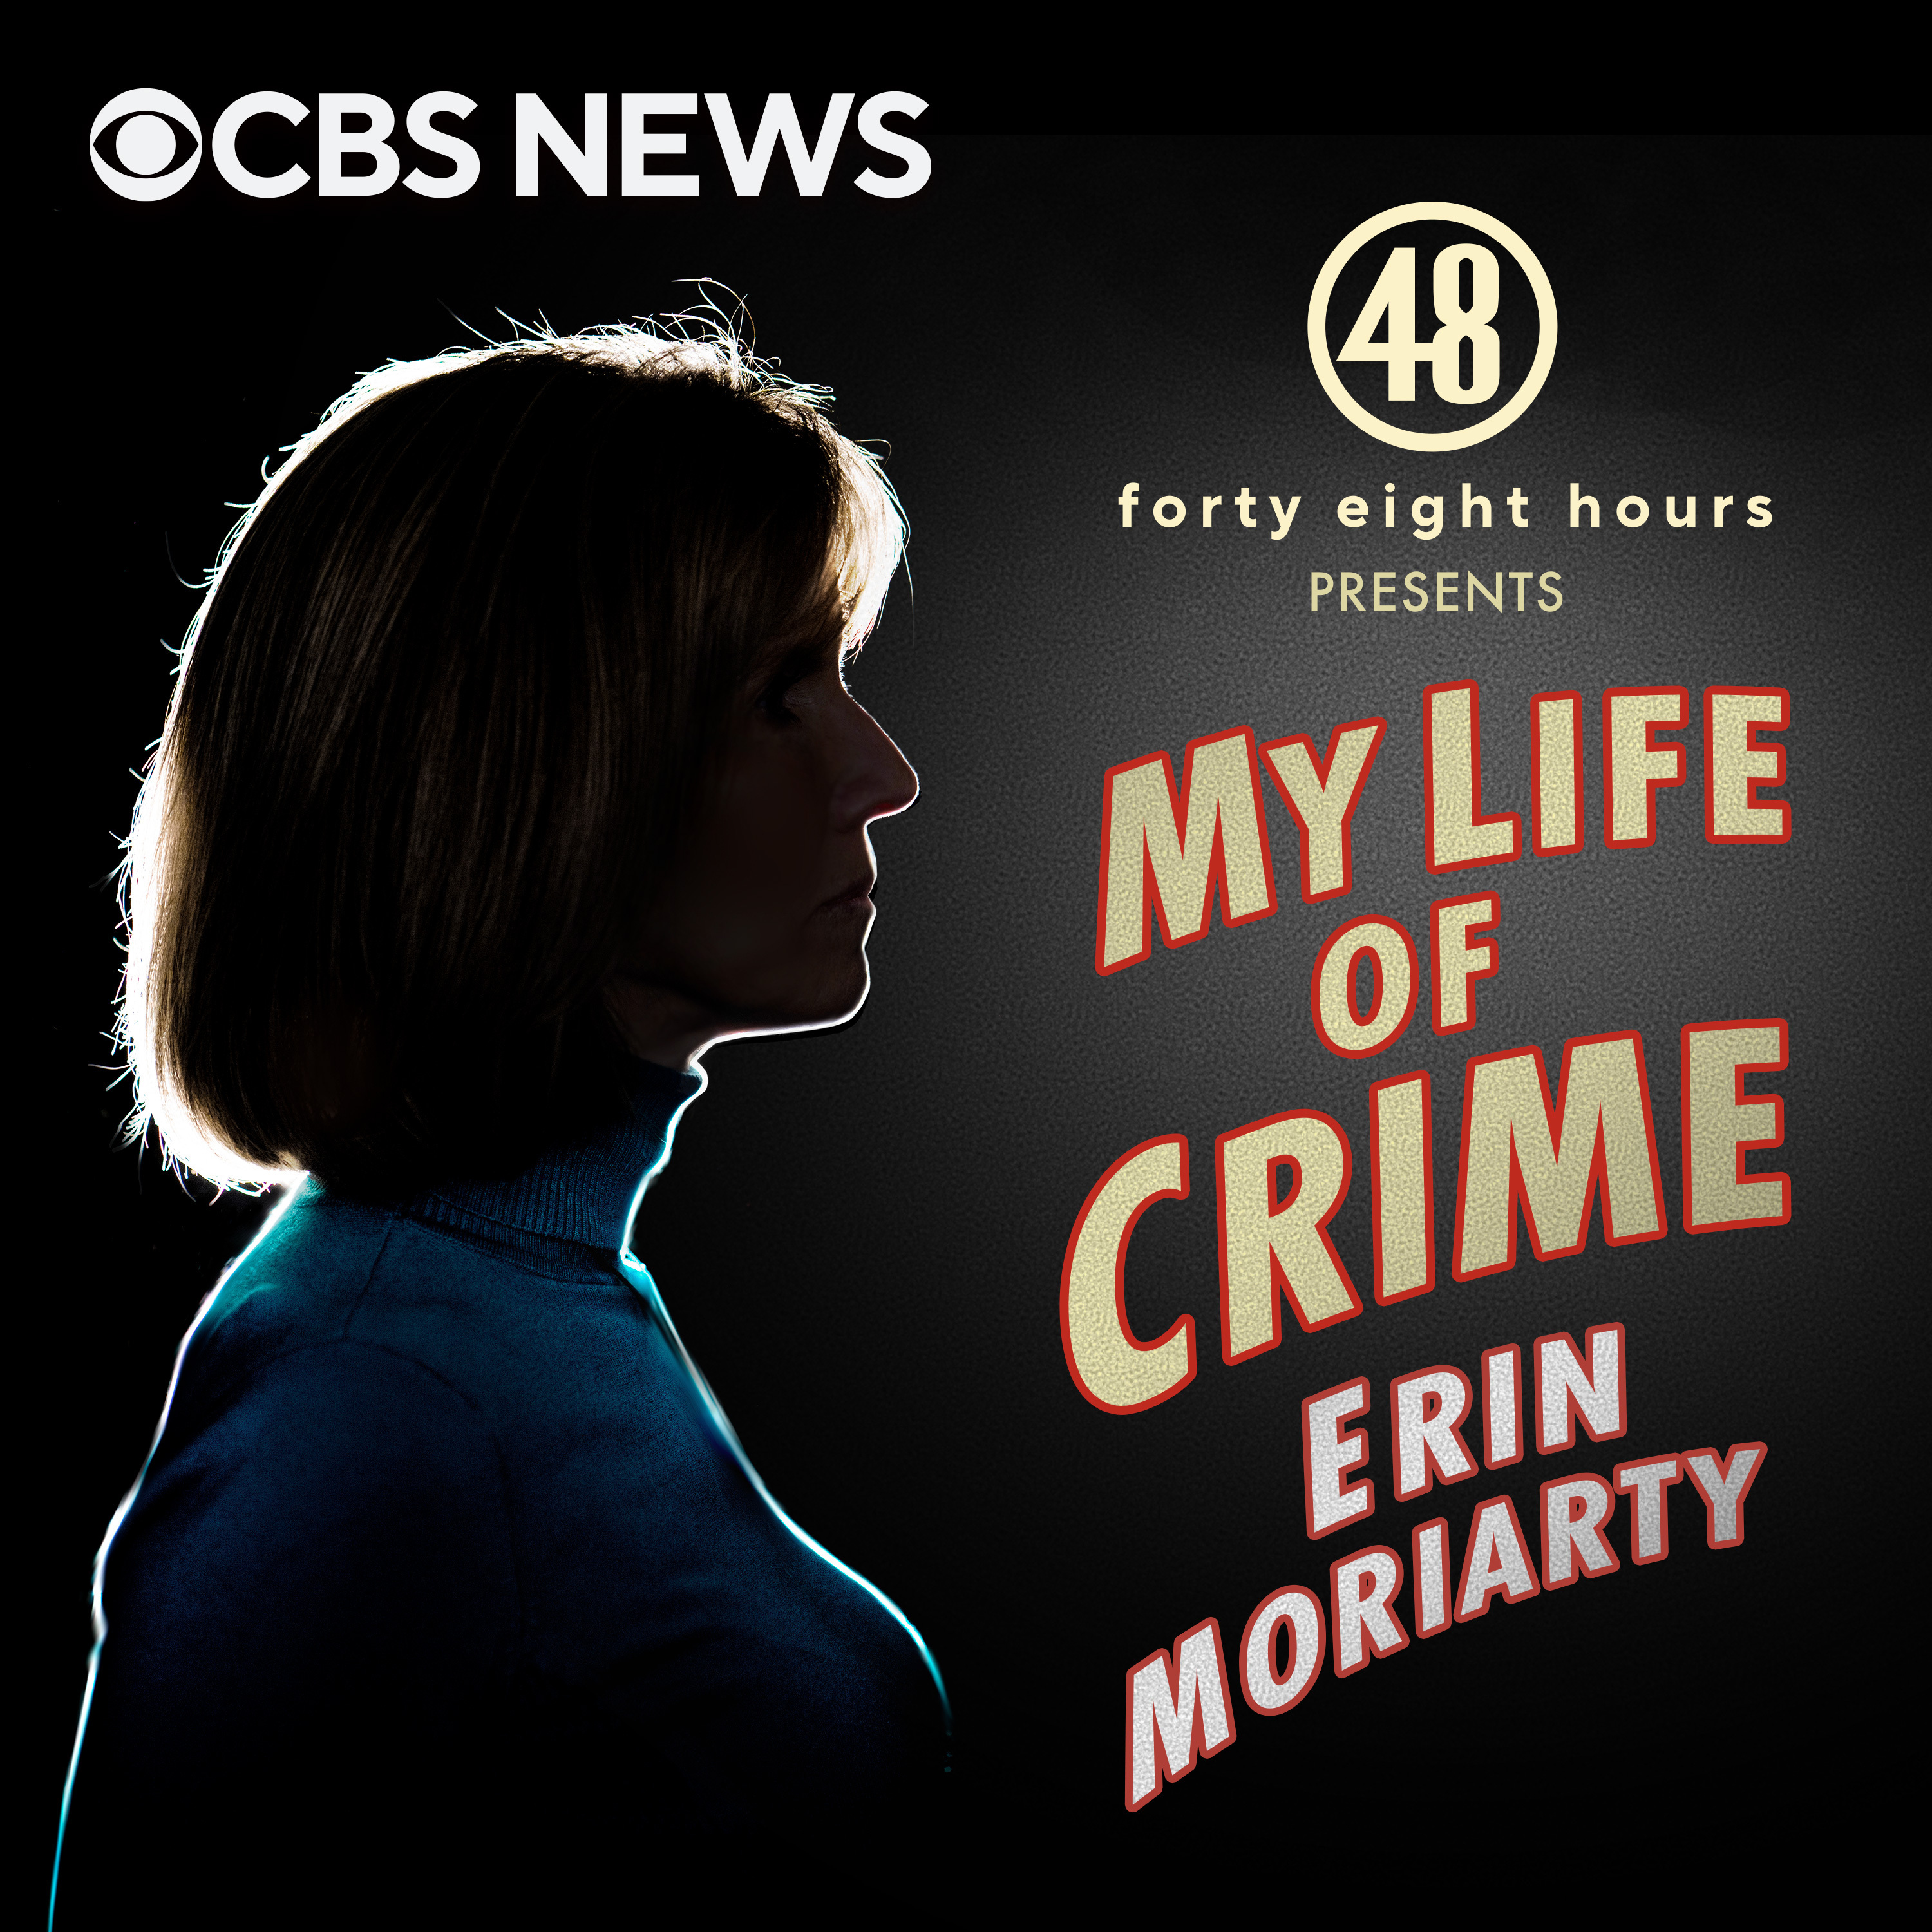 Inside a Killer's Gamble: The Interview with Mario Garcia | My Life of Crime  by CBS News